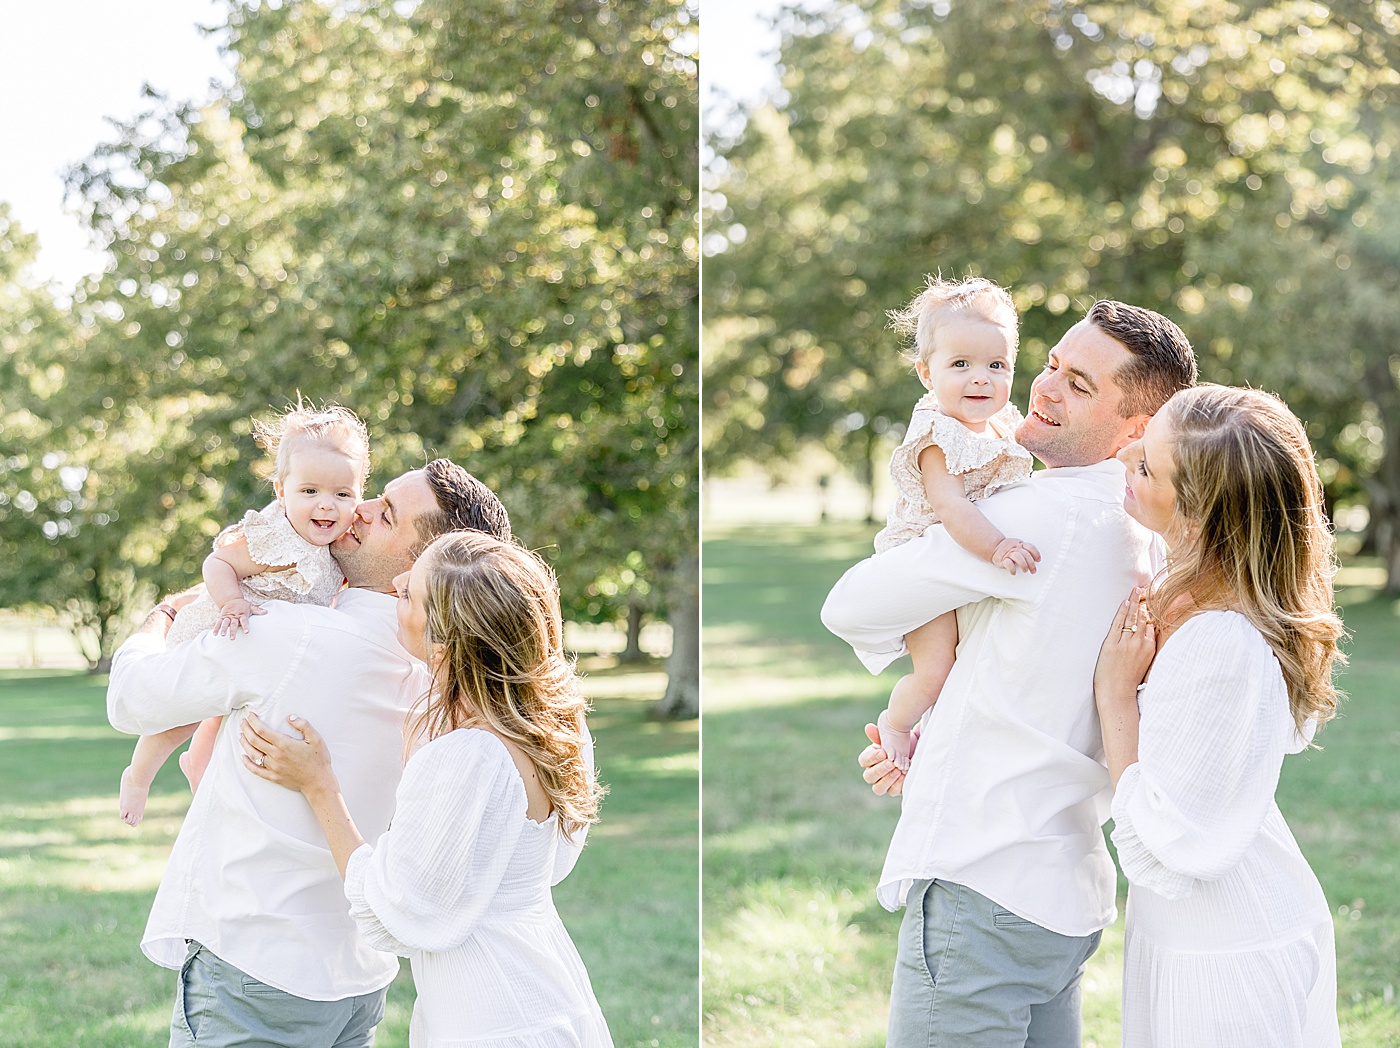 Outdoor family photoshoot at Sherwood Island State Park, Westport CT | Kristin Wood Photography